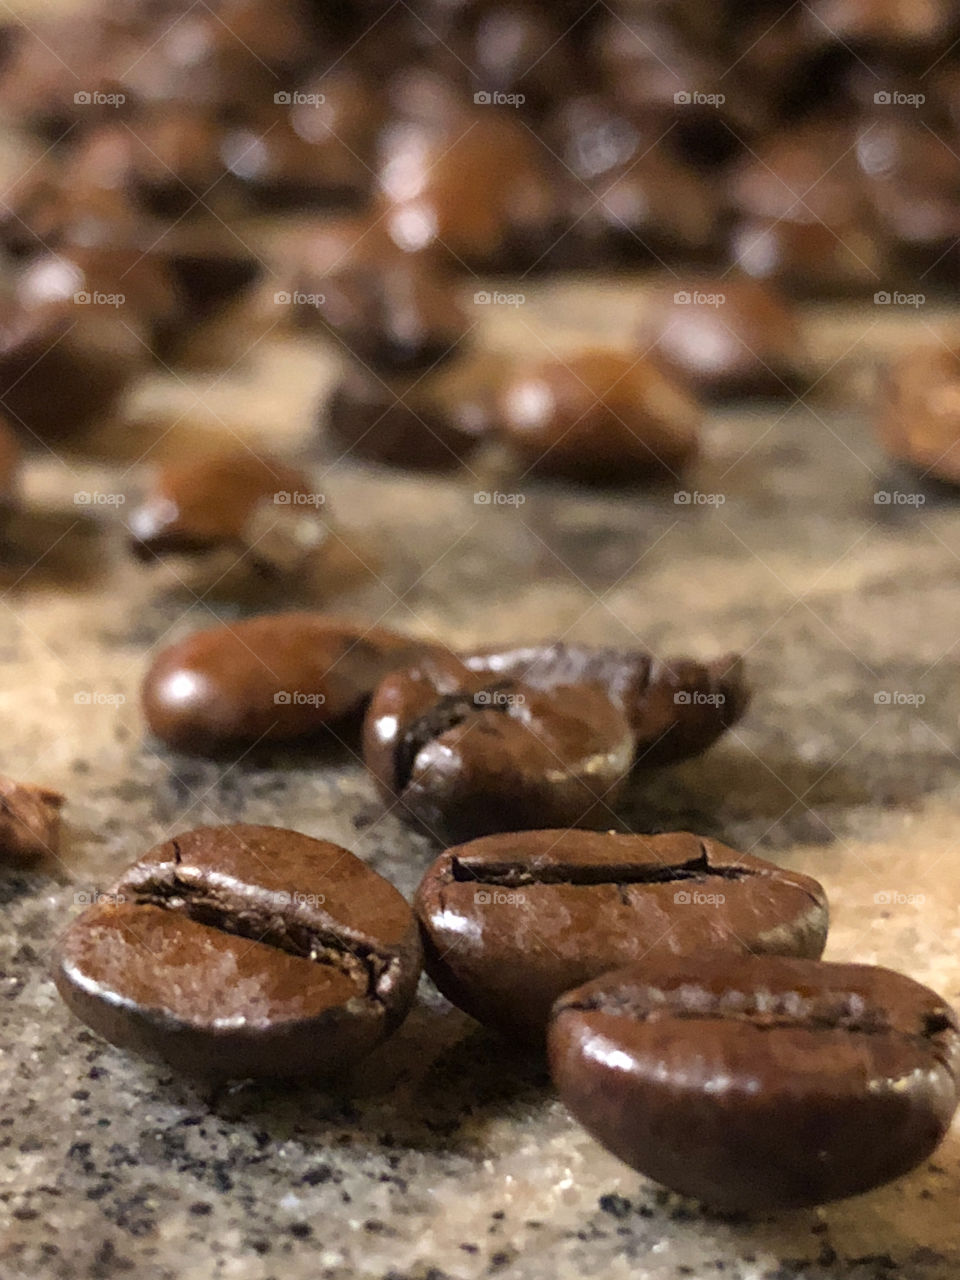 the smell of fresh coffee beans - captured in a photo